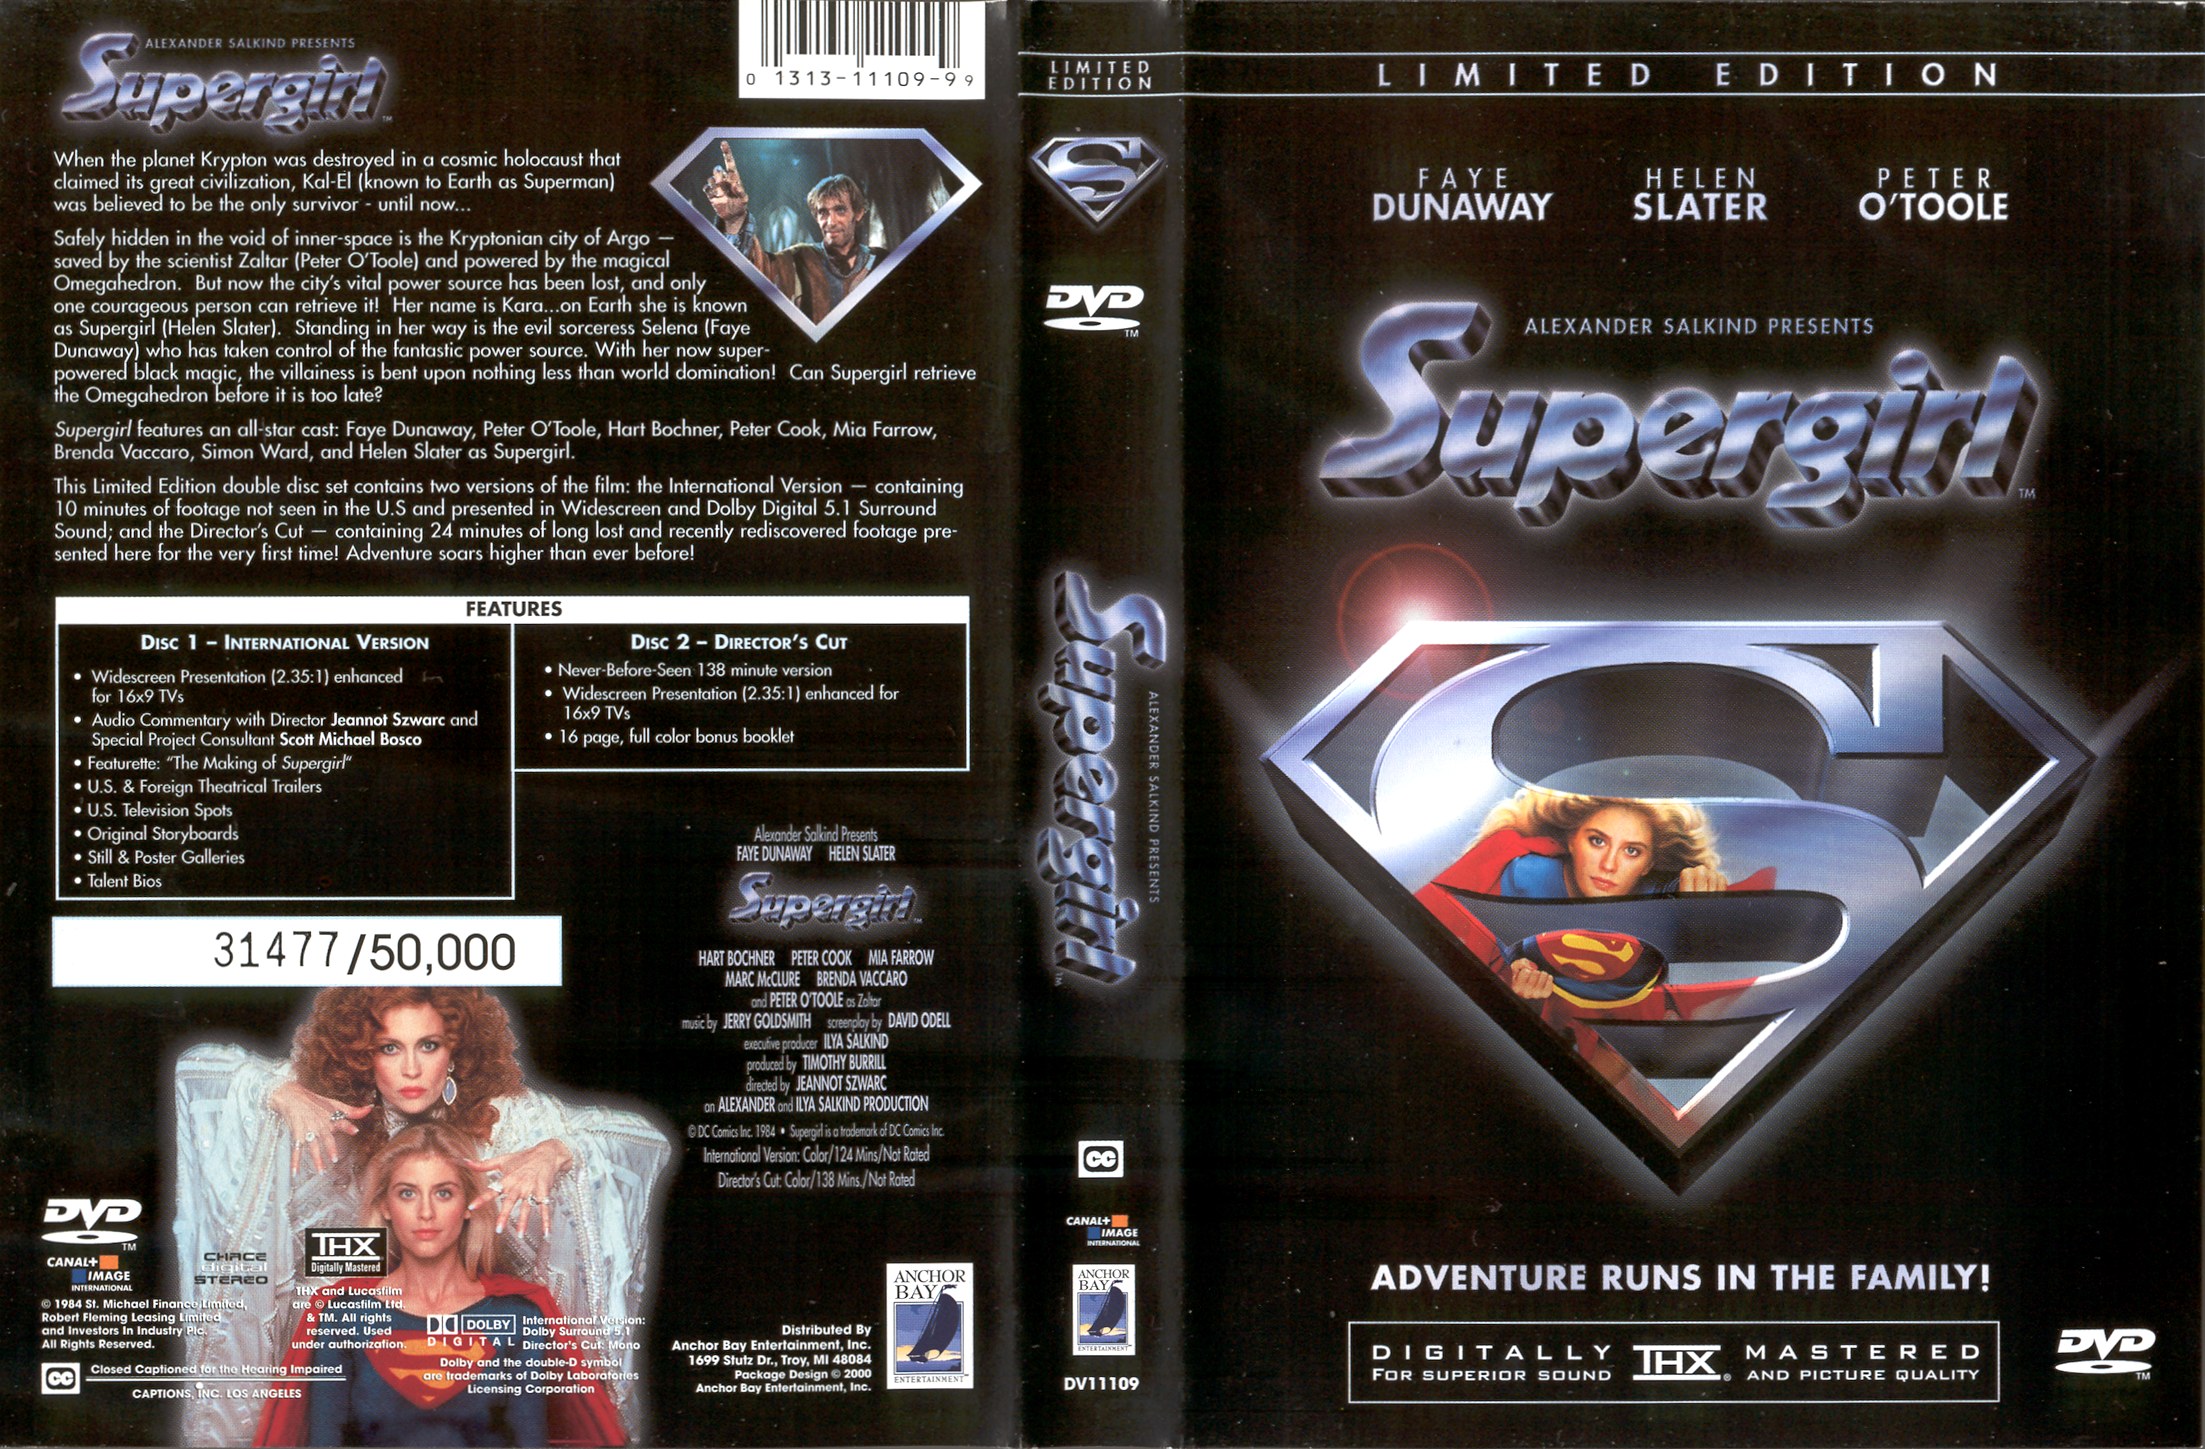 SUPERGIRL LE DVD Dustcover